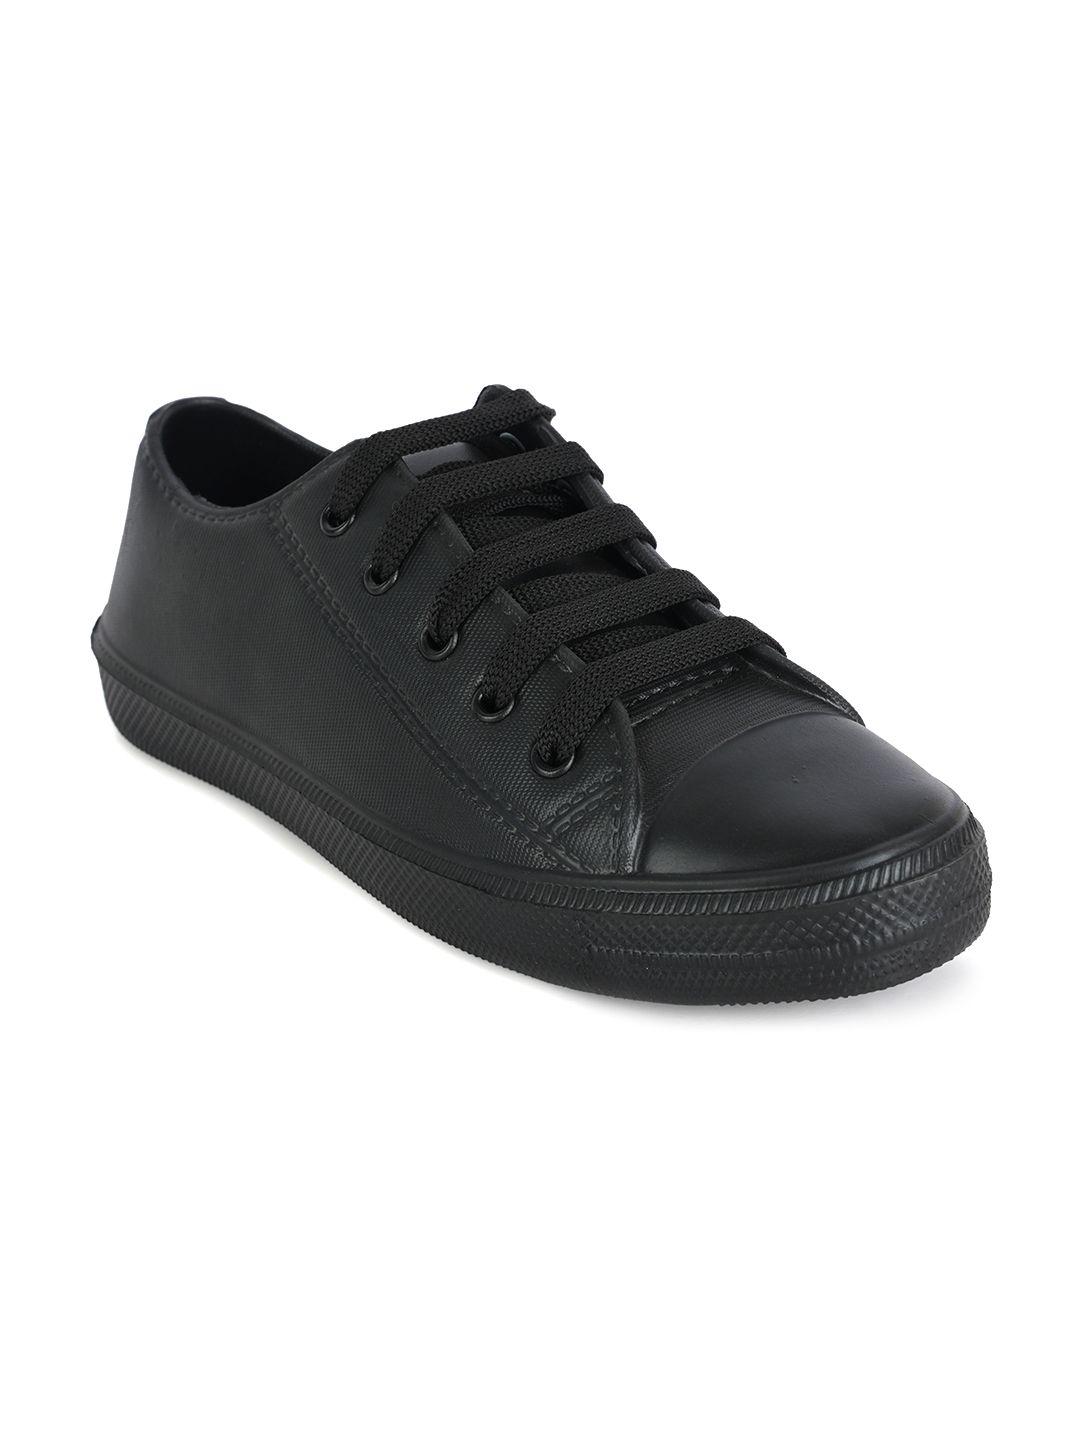 action plus unisex lace up round toe sneakers